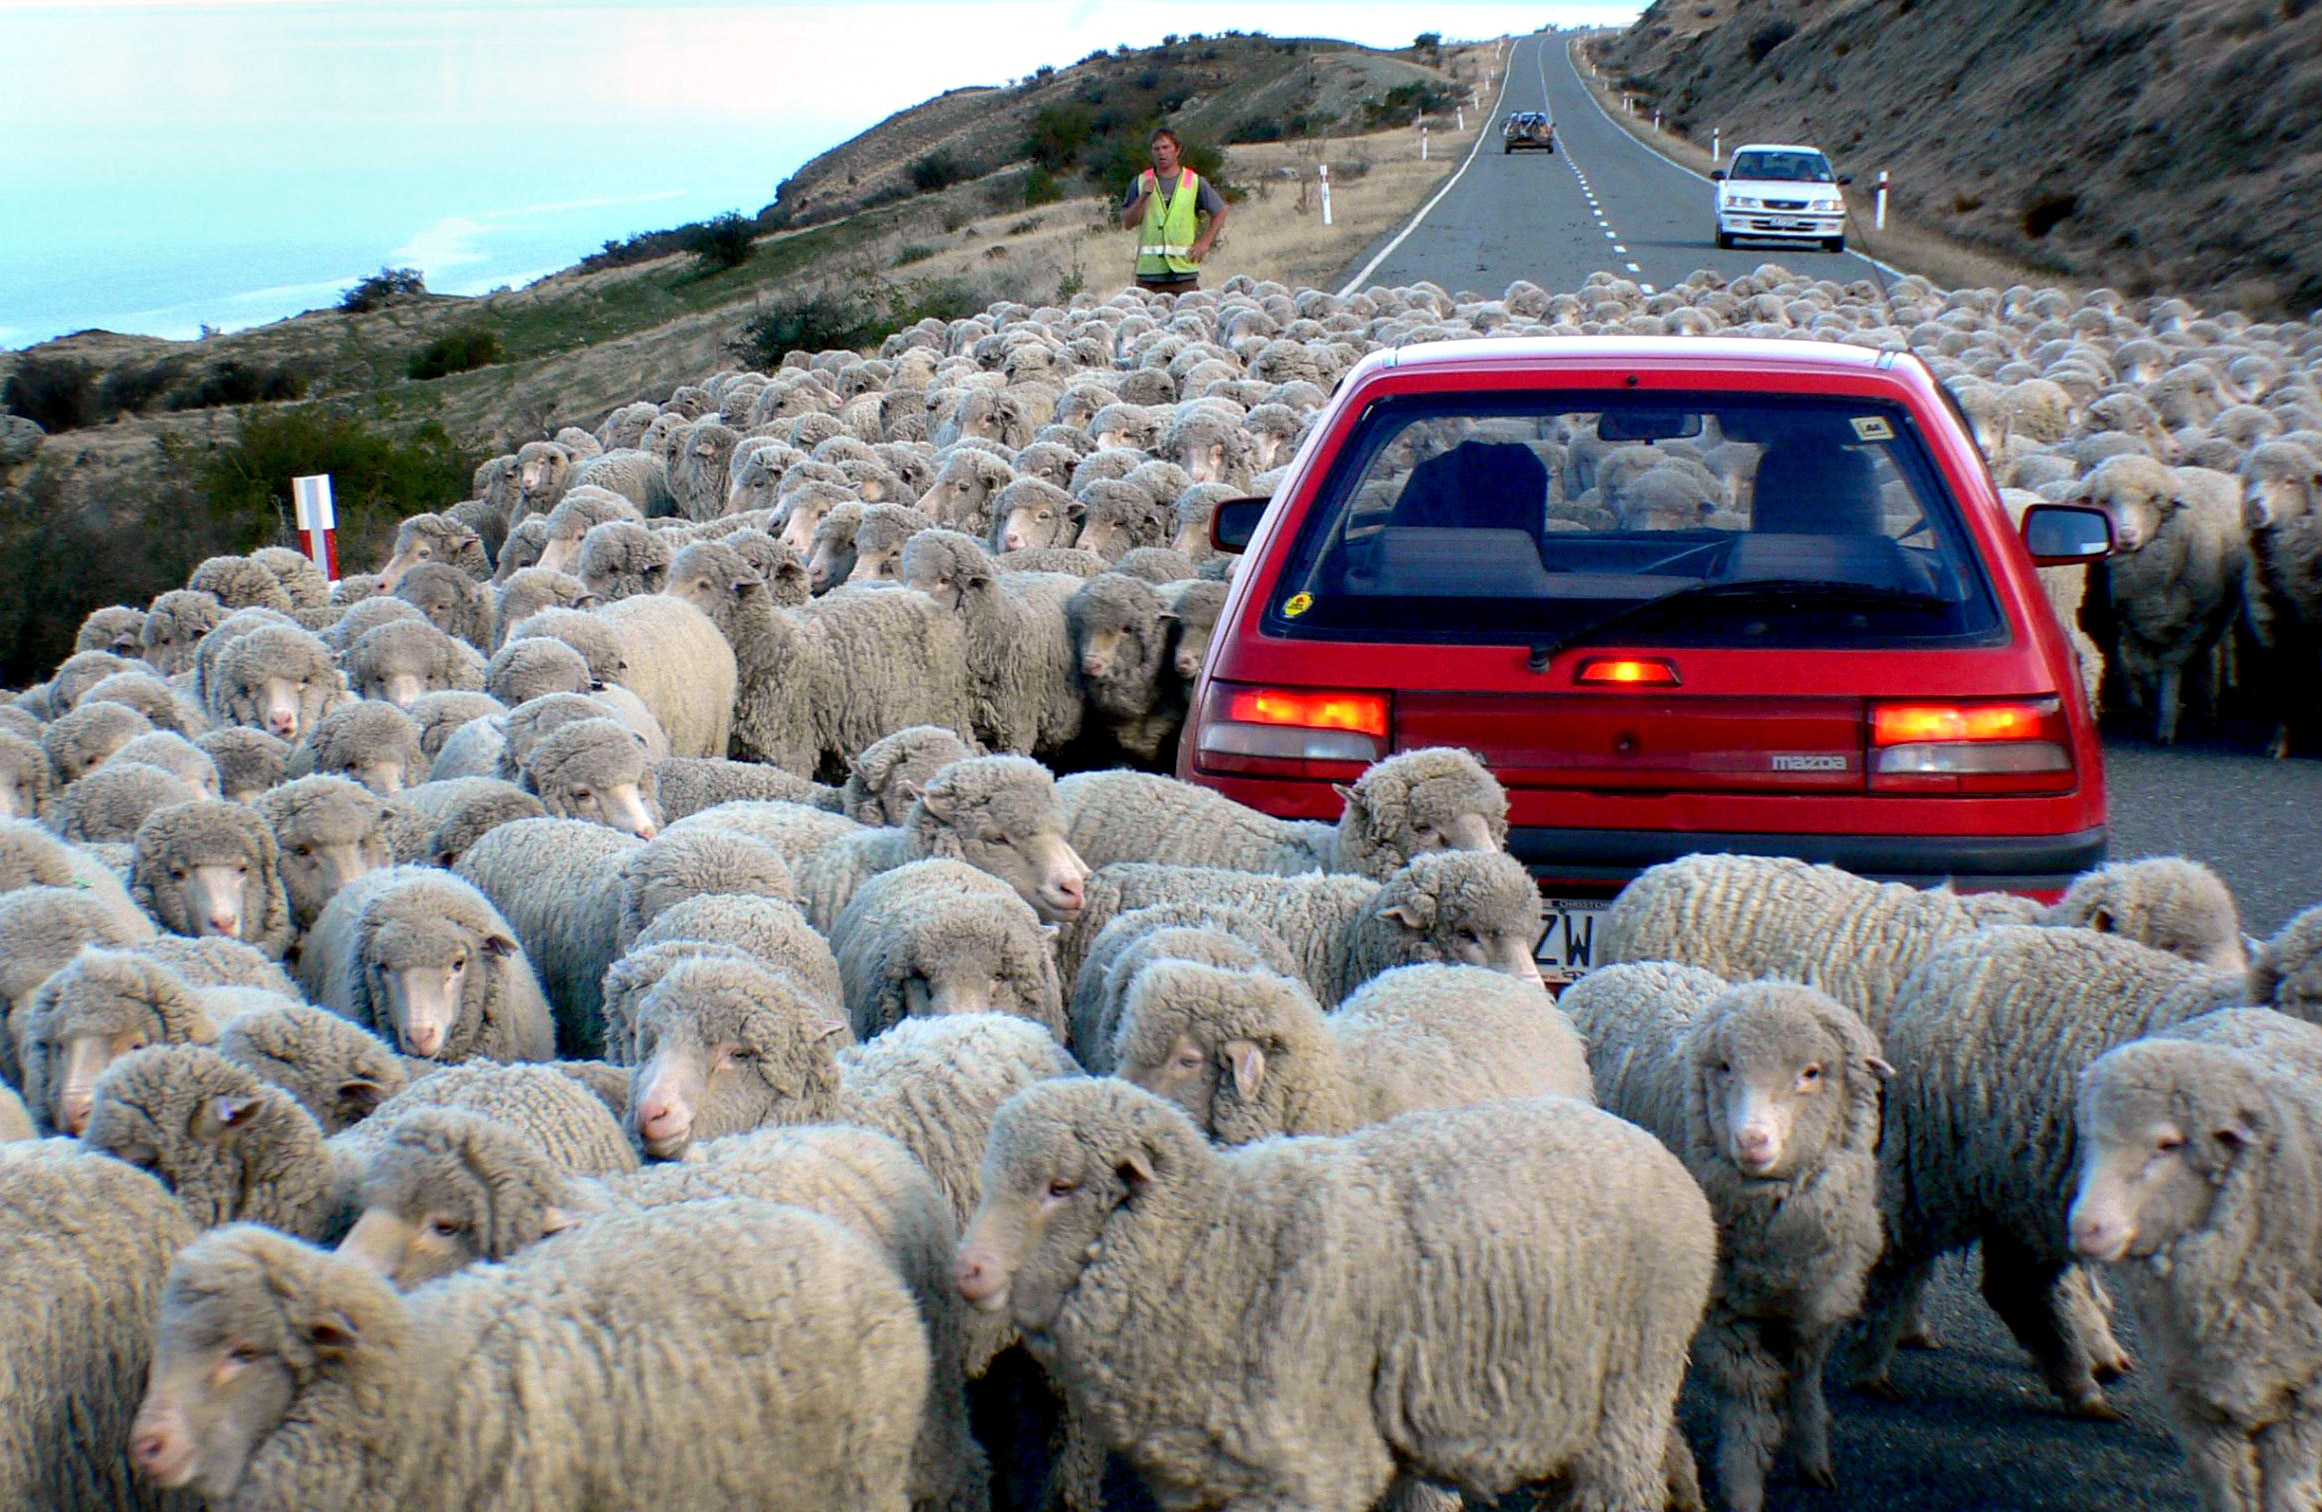 Down a rural road.NZ, driving in sheeps